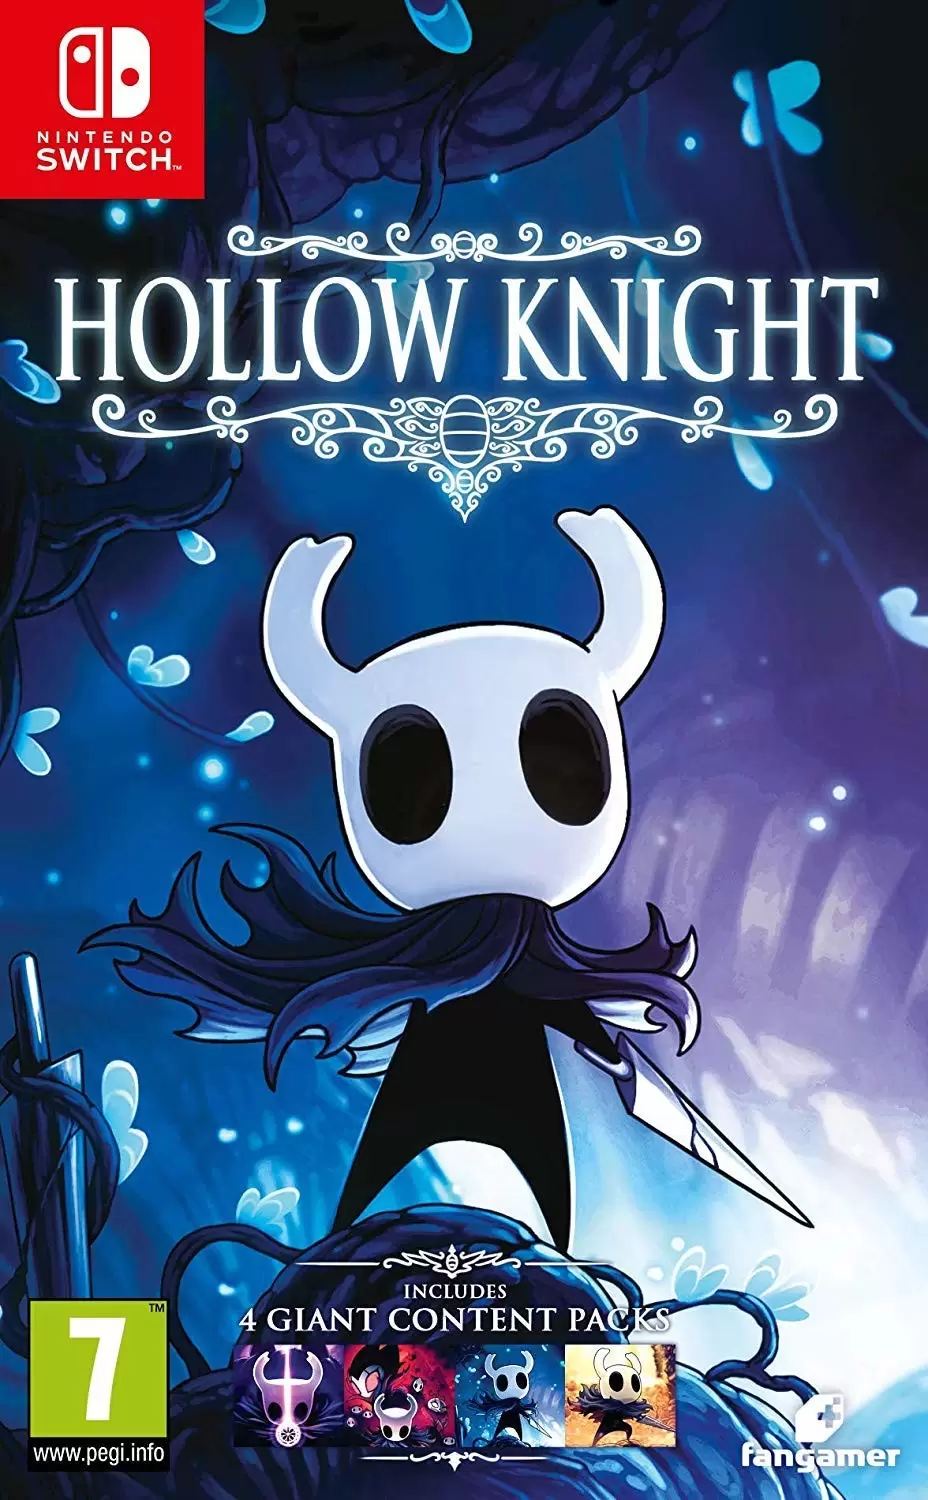 Nintendo Switch Games - Hollow Knight